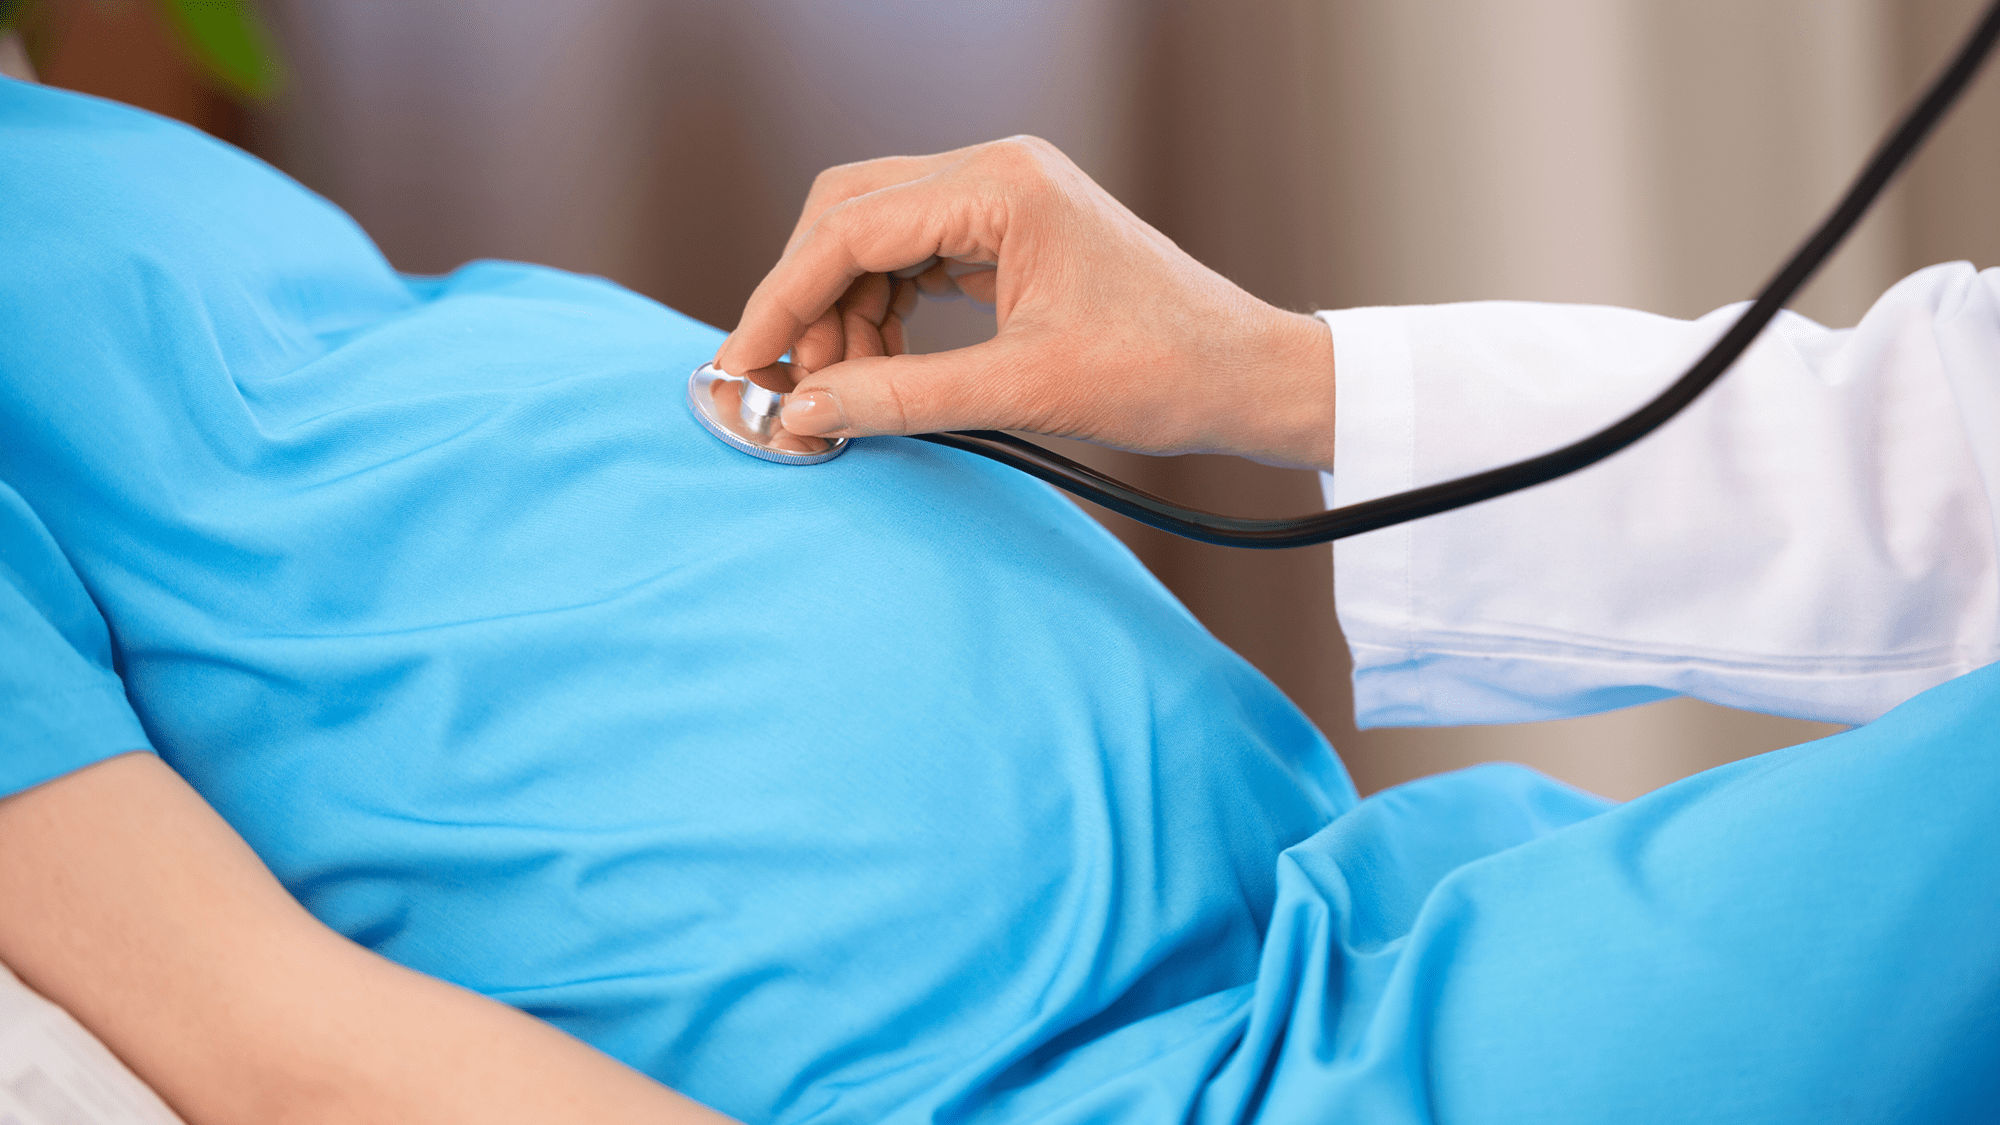 Pregnant people with COVID-19 are 7 times more likely to die in childbirth